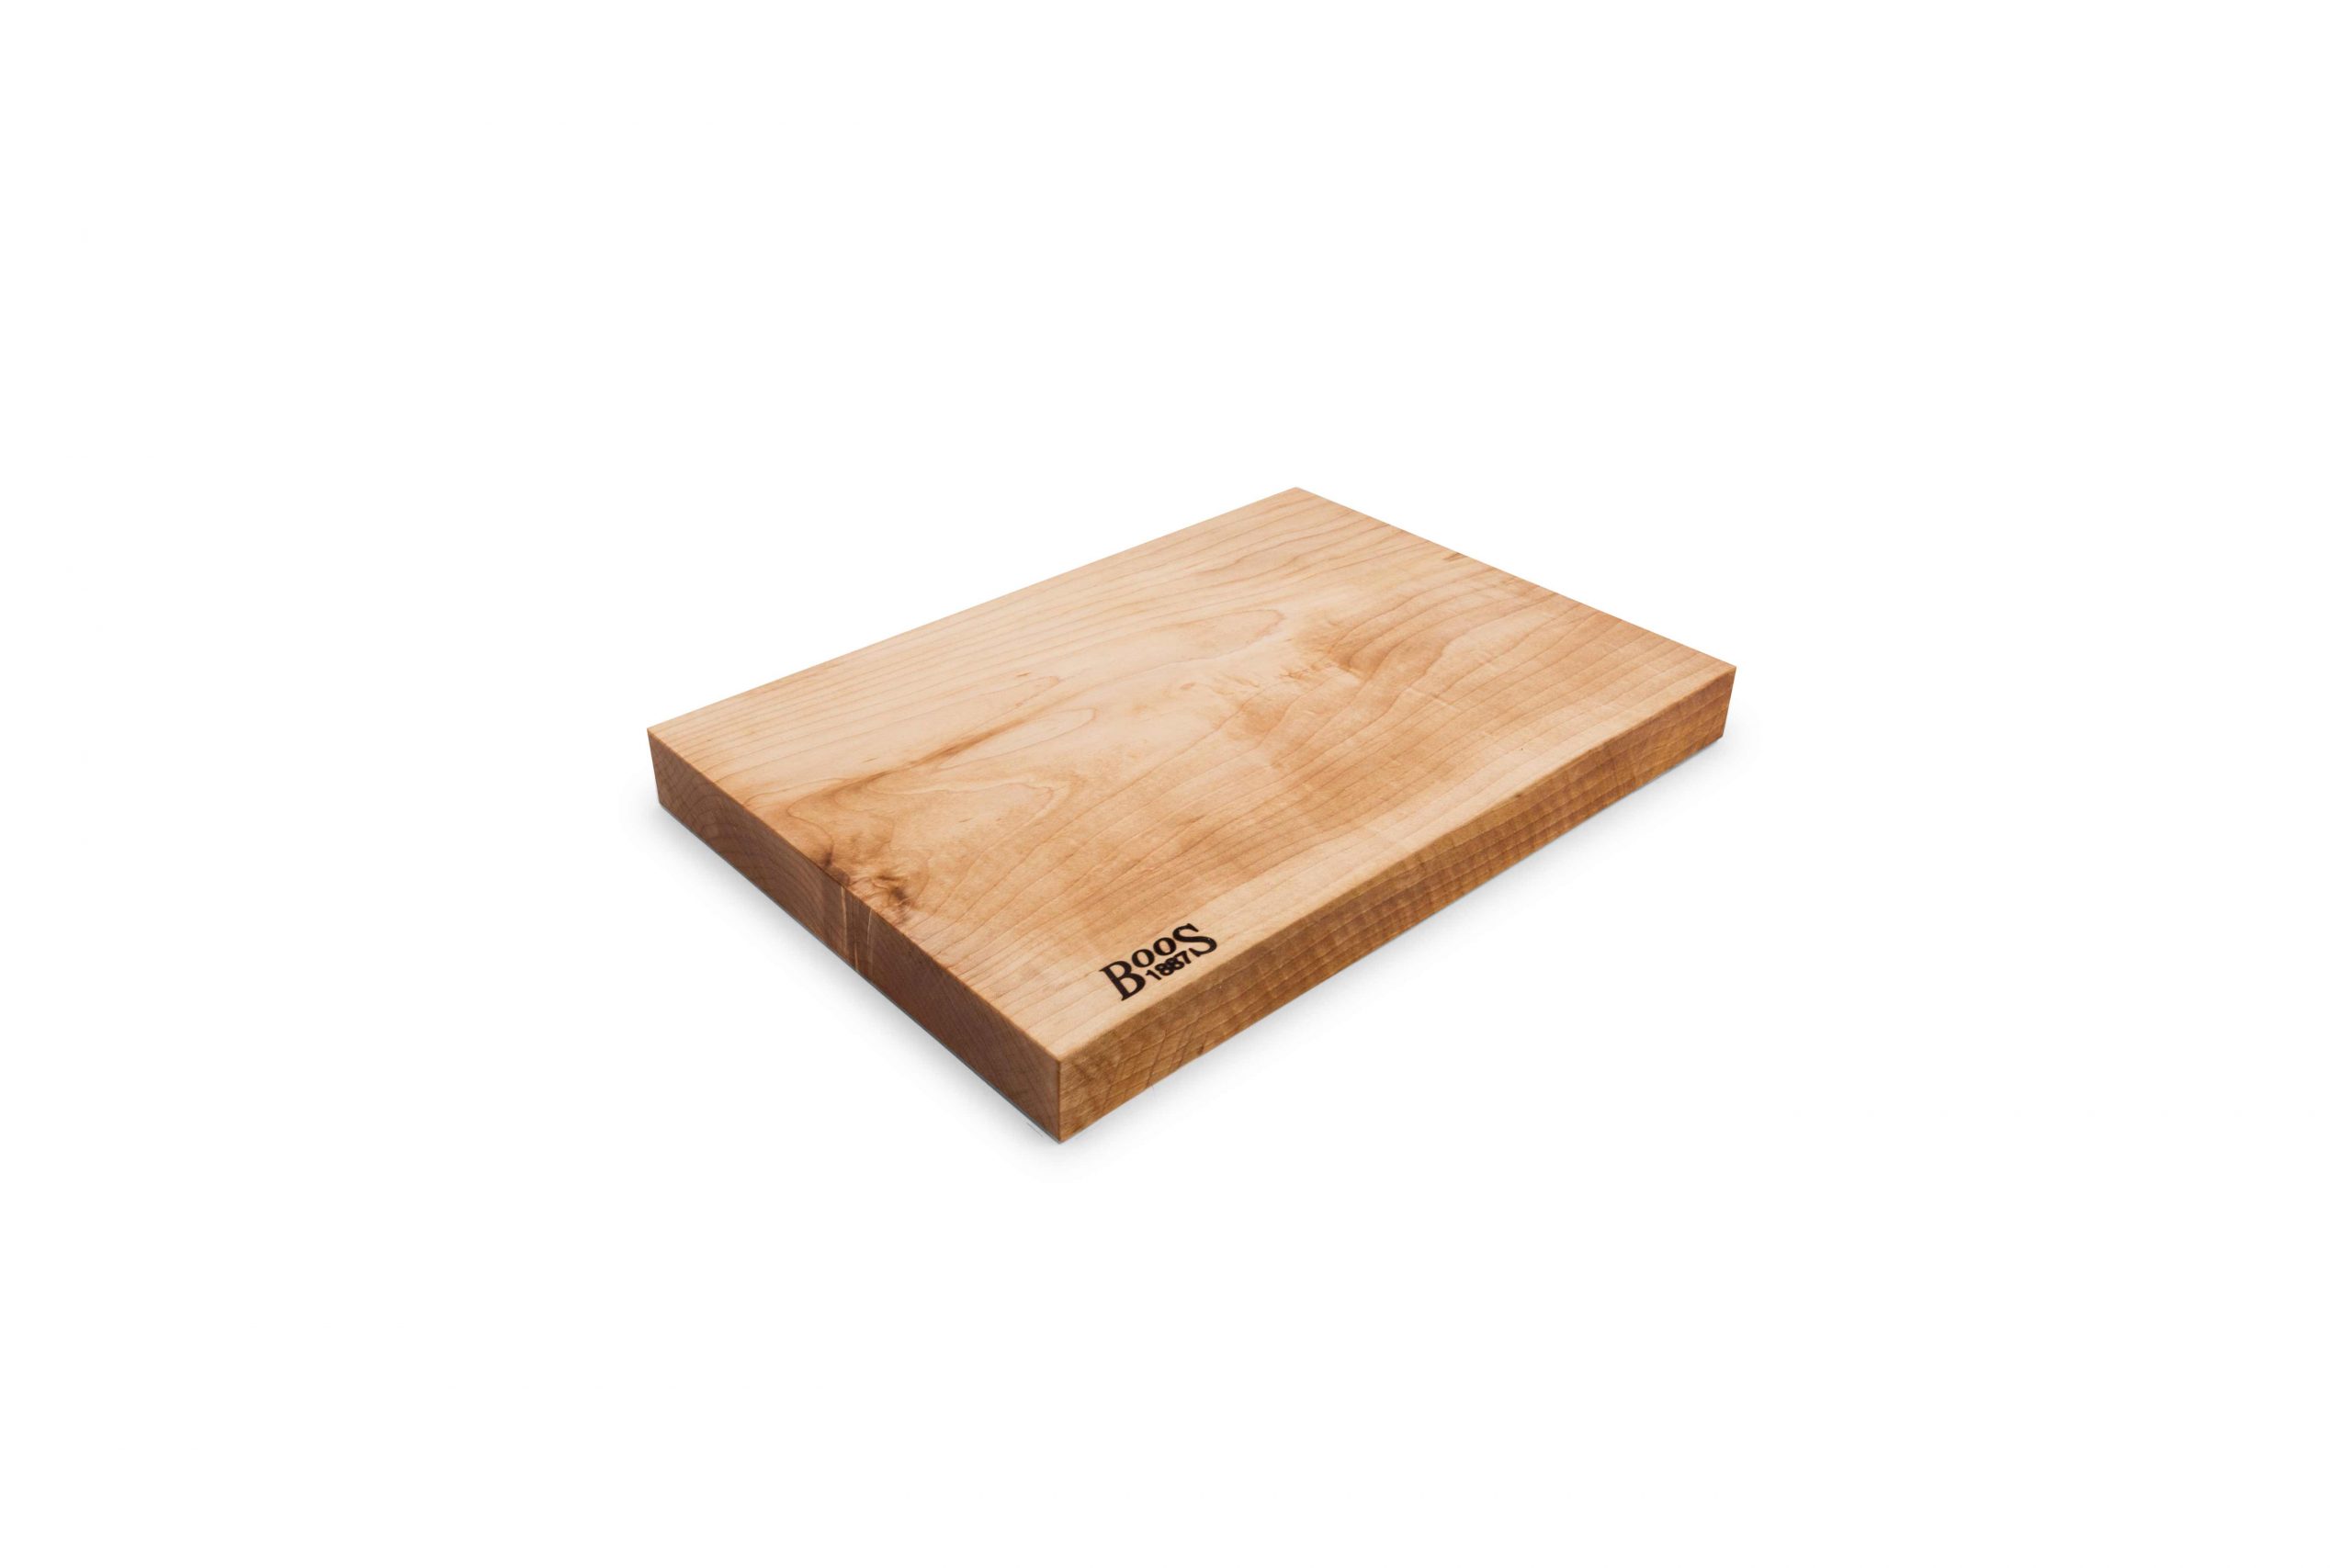 Boos 1887 / Rustic Edge one piece cutting board; hard maple; can be used on both sides 5